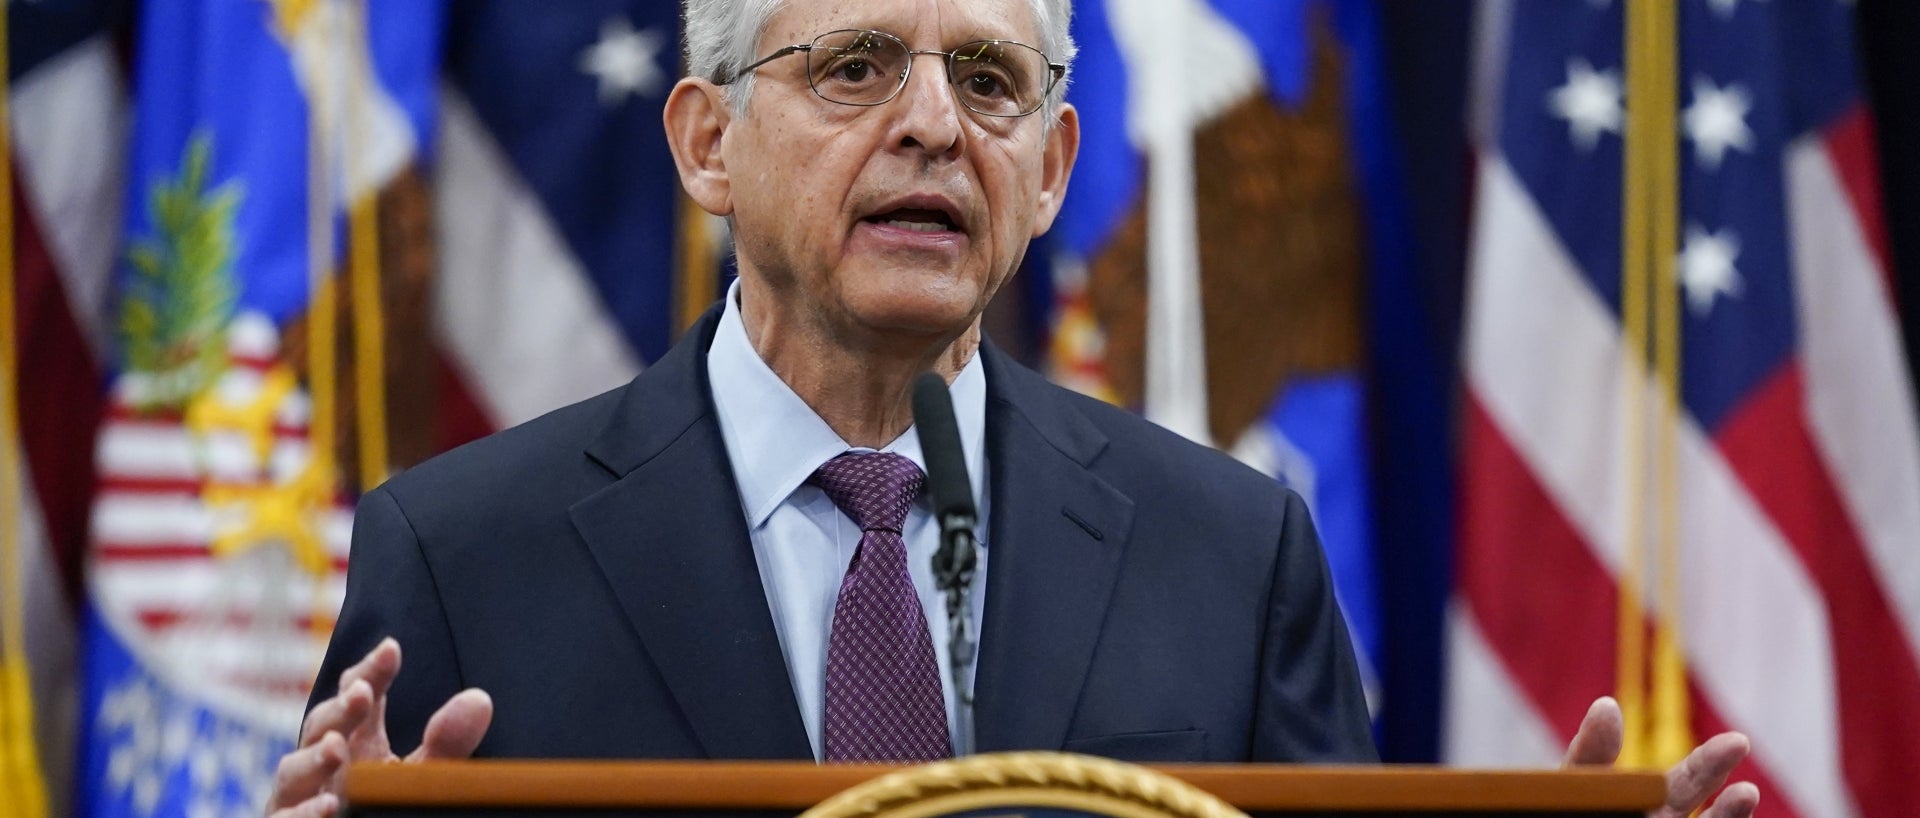 Attorney General Merrick Garland, of the Justice Department, addresses the nation ahead of the anniversary of the Capitol Riots.